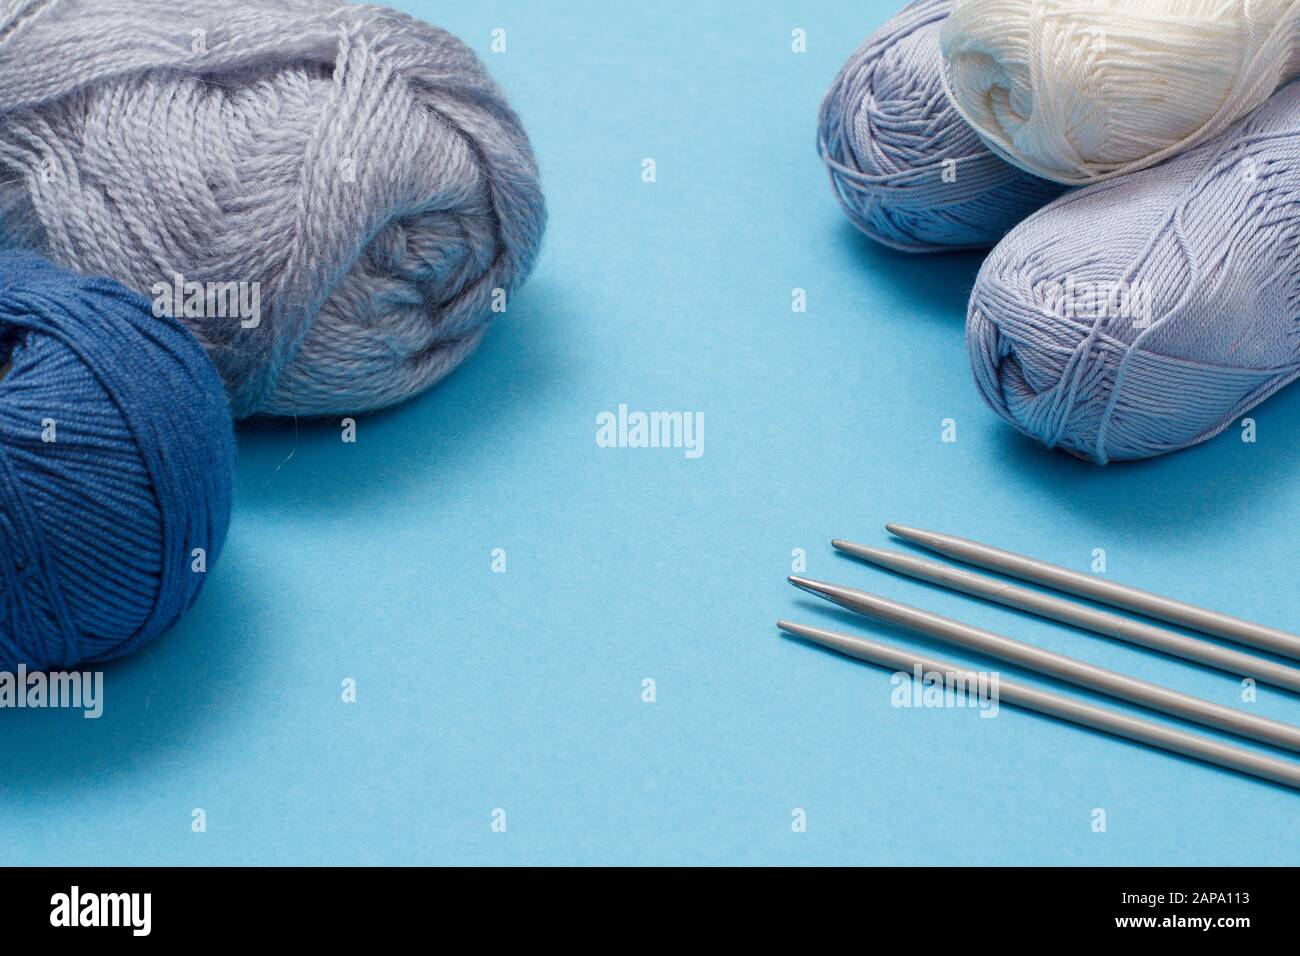 Knitting yarn balls and metal knitting needles on a blue background. Knitting concept. Top view. Stock Photo